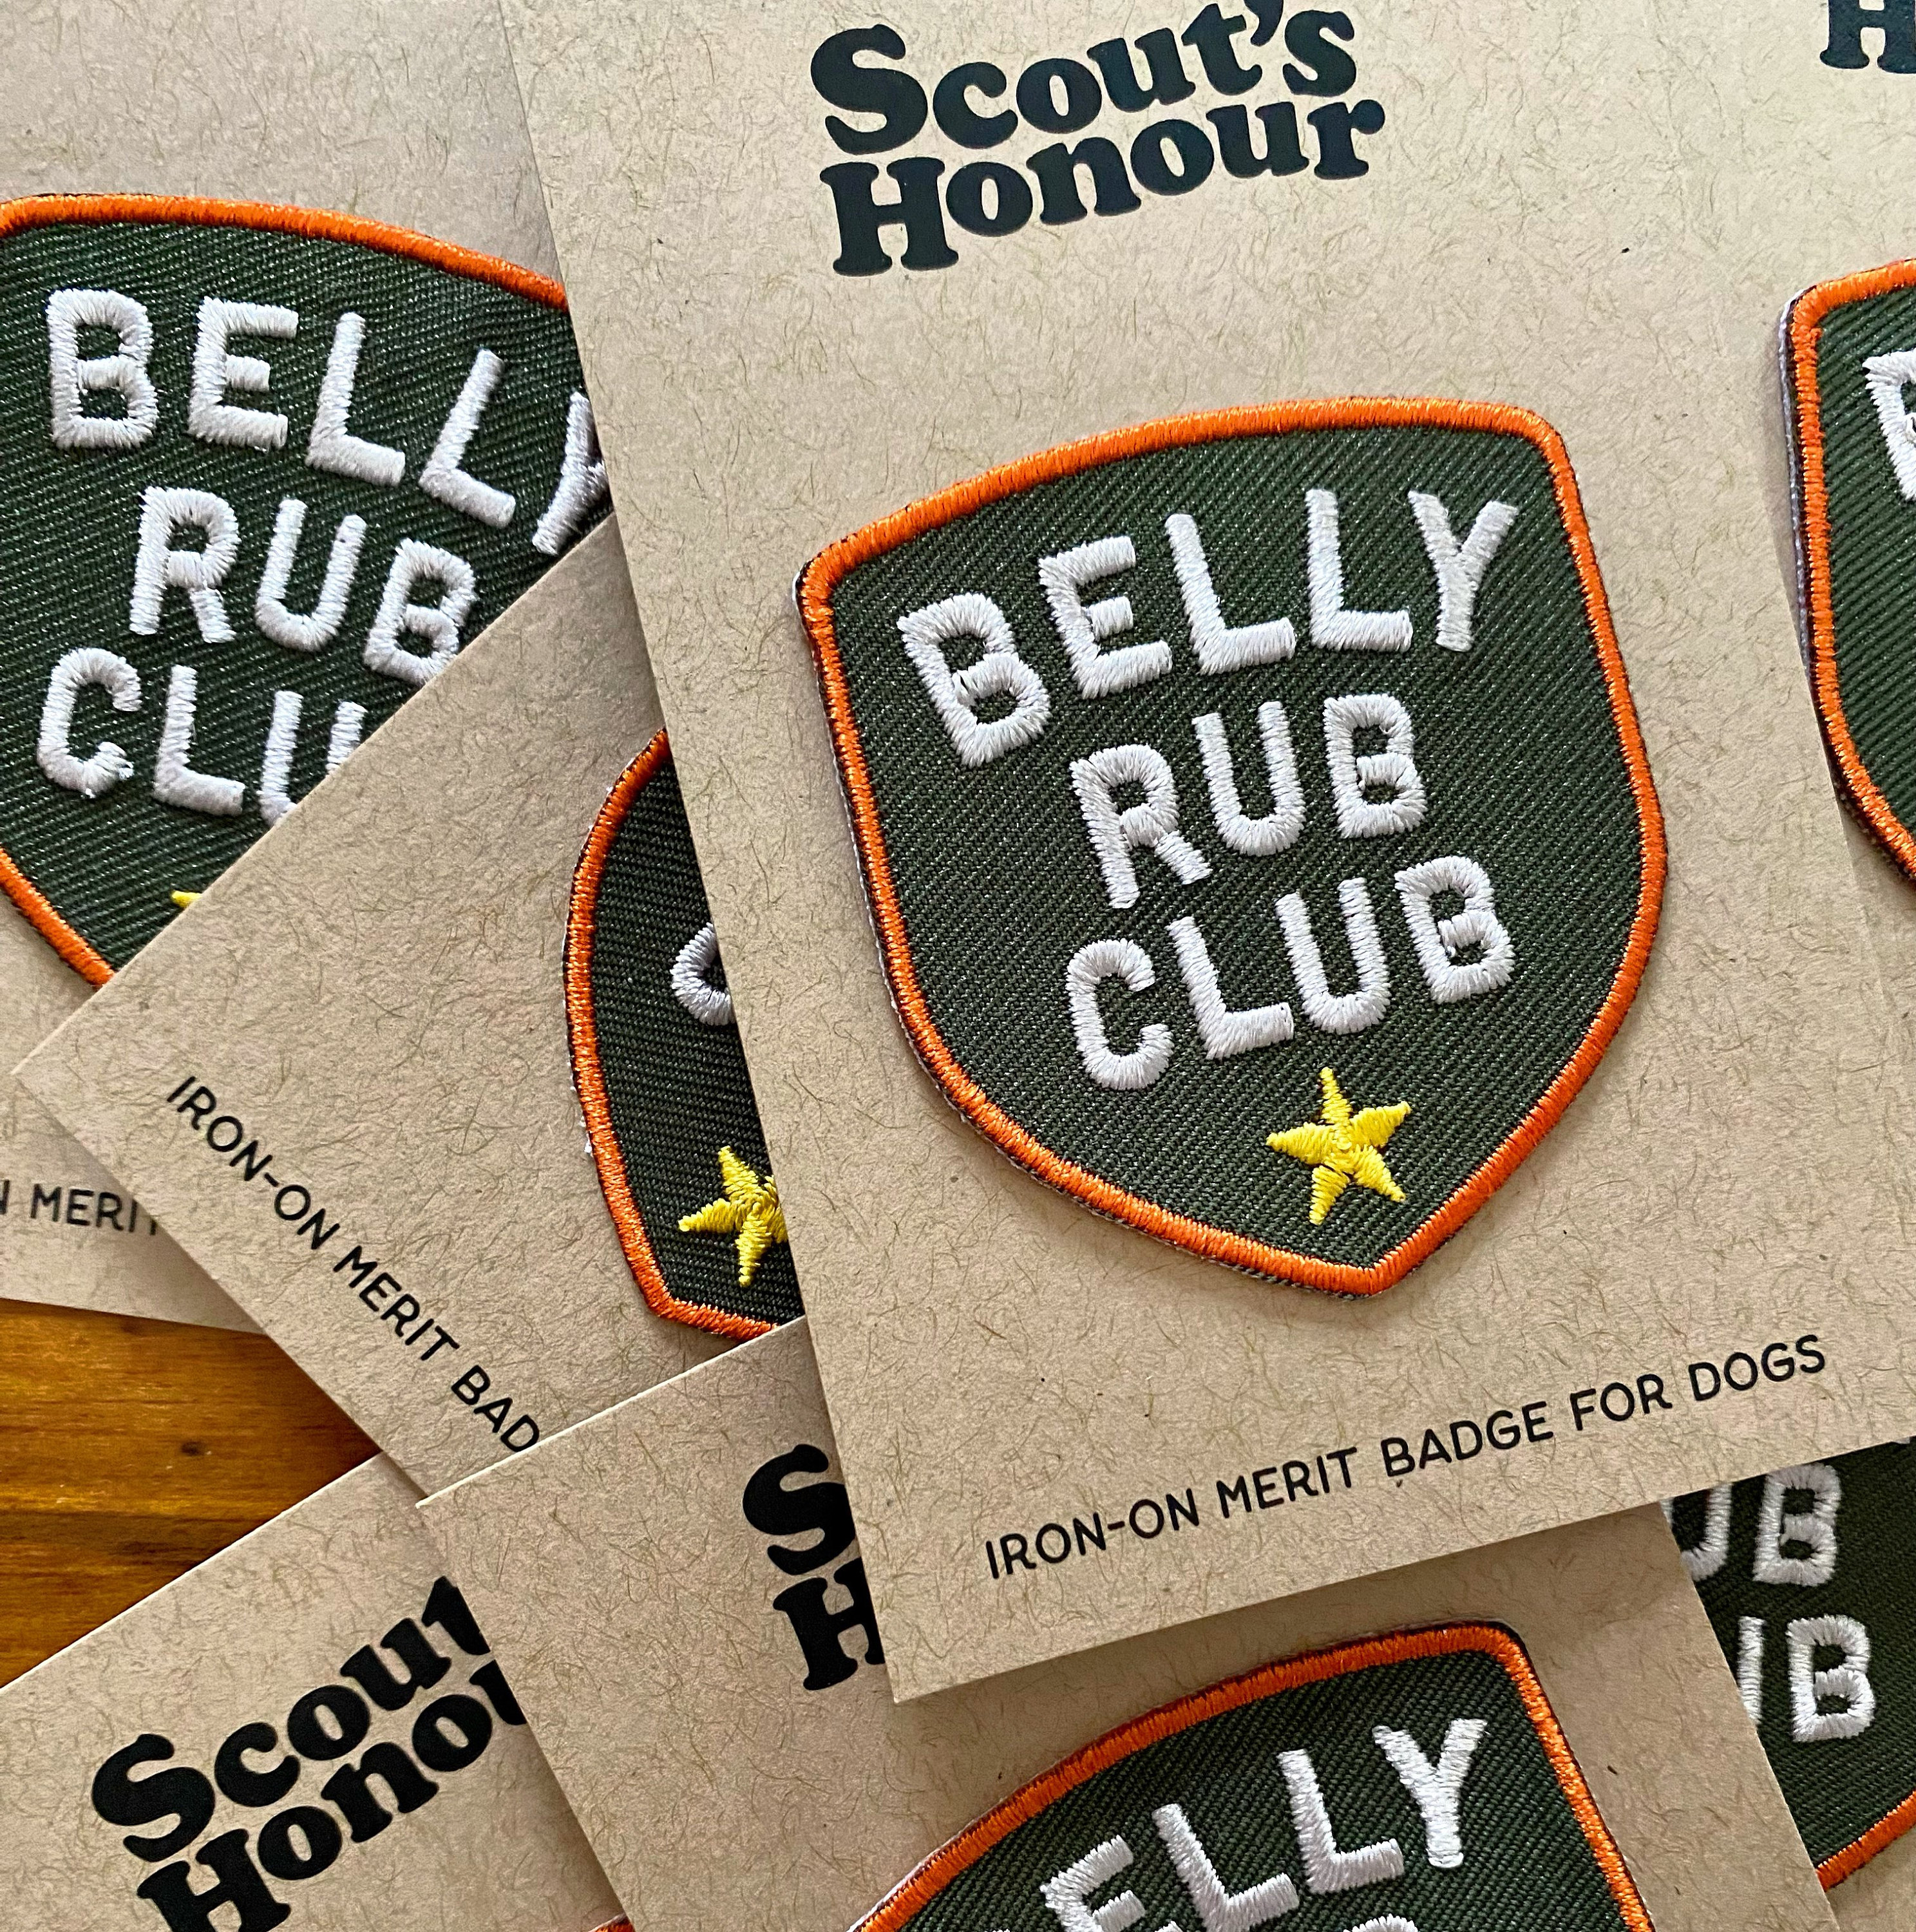 Embroidered Merit Badge/patch Belly Rub Club 